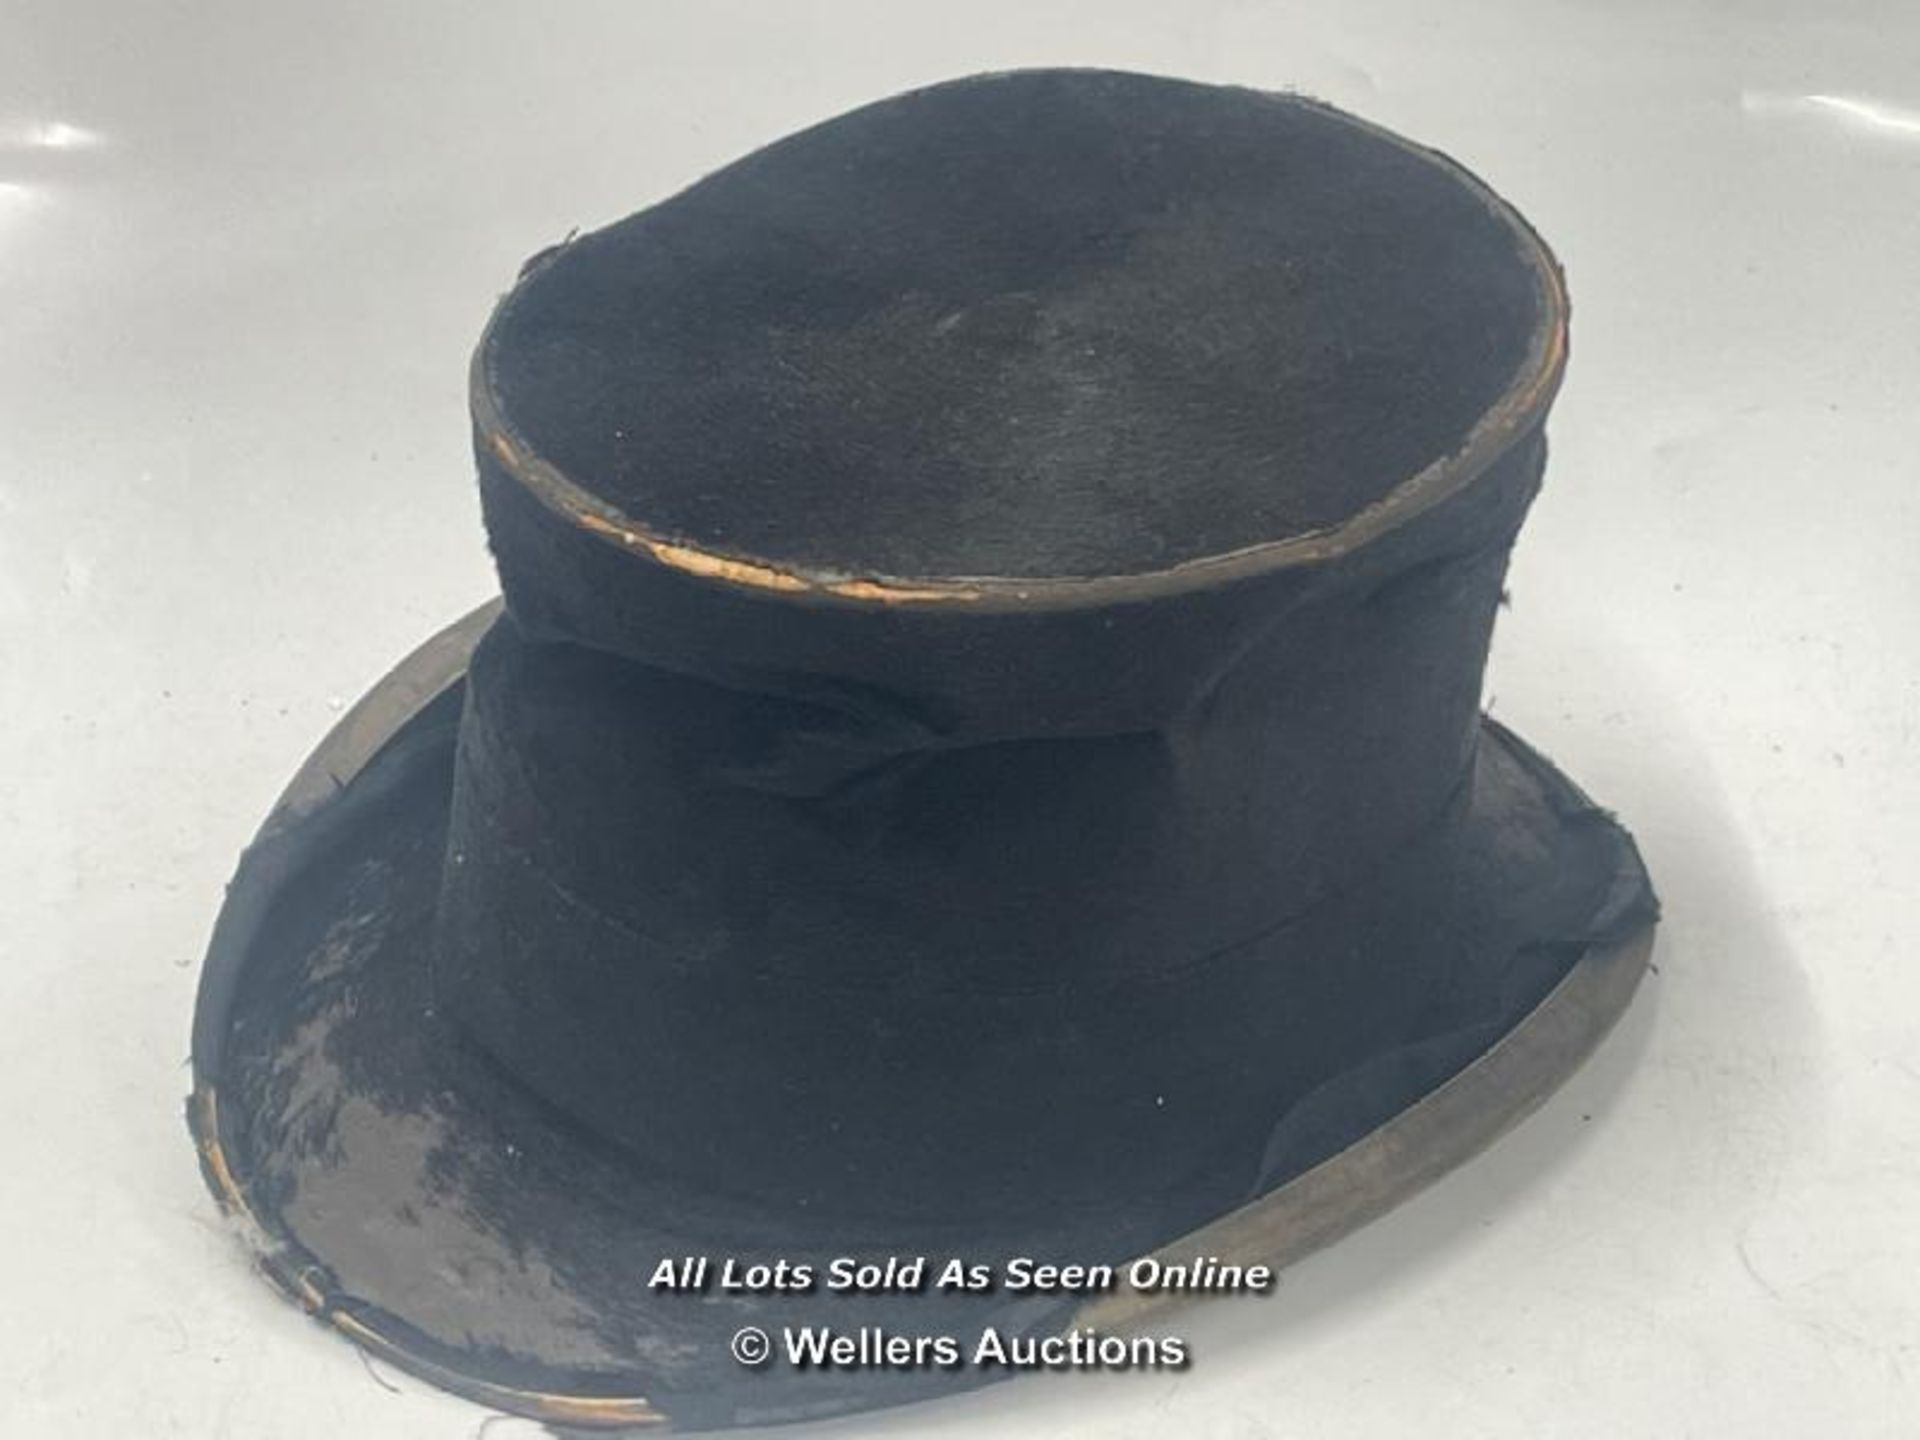 ANTIQUE HENRY HEATH TOP HAT. 15.5 X 19.5CM HEAD SIZE. IN NEED OF RESTORATION